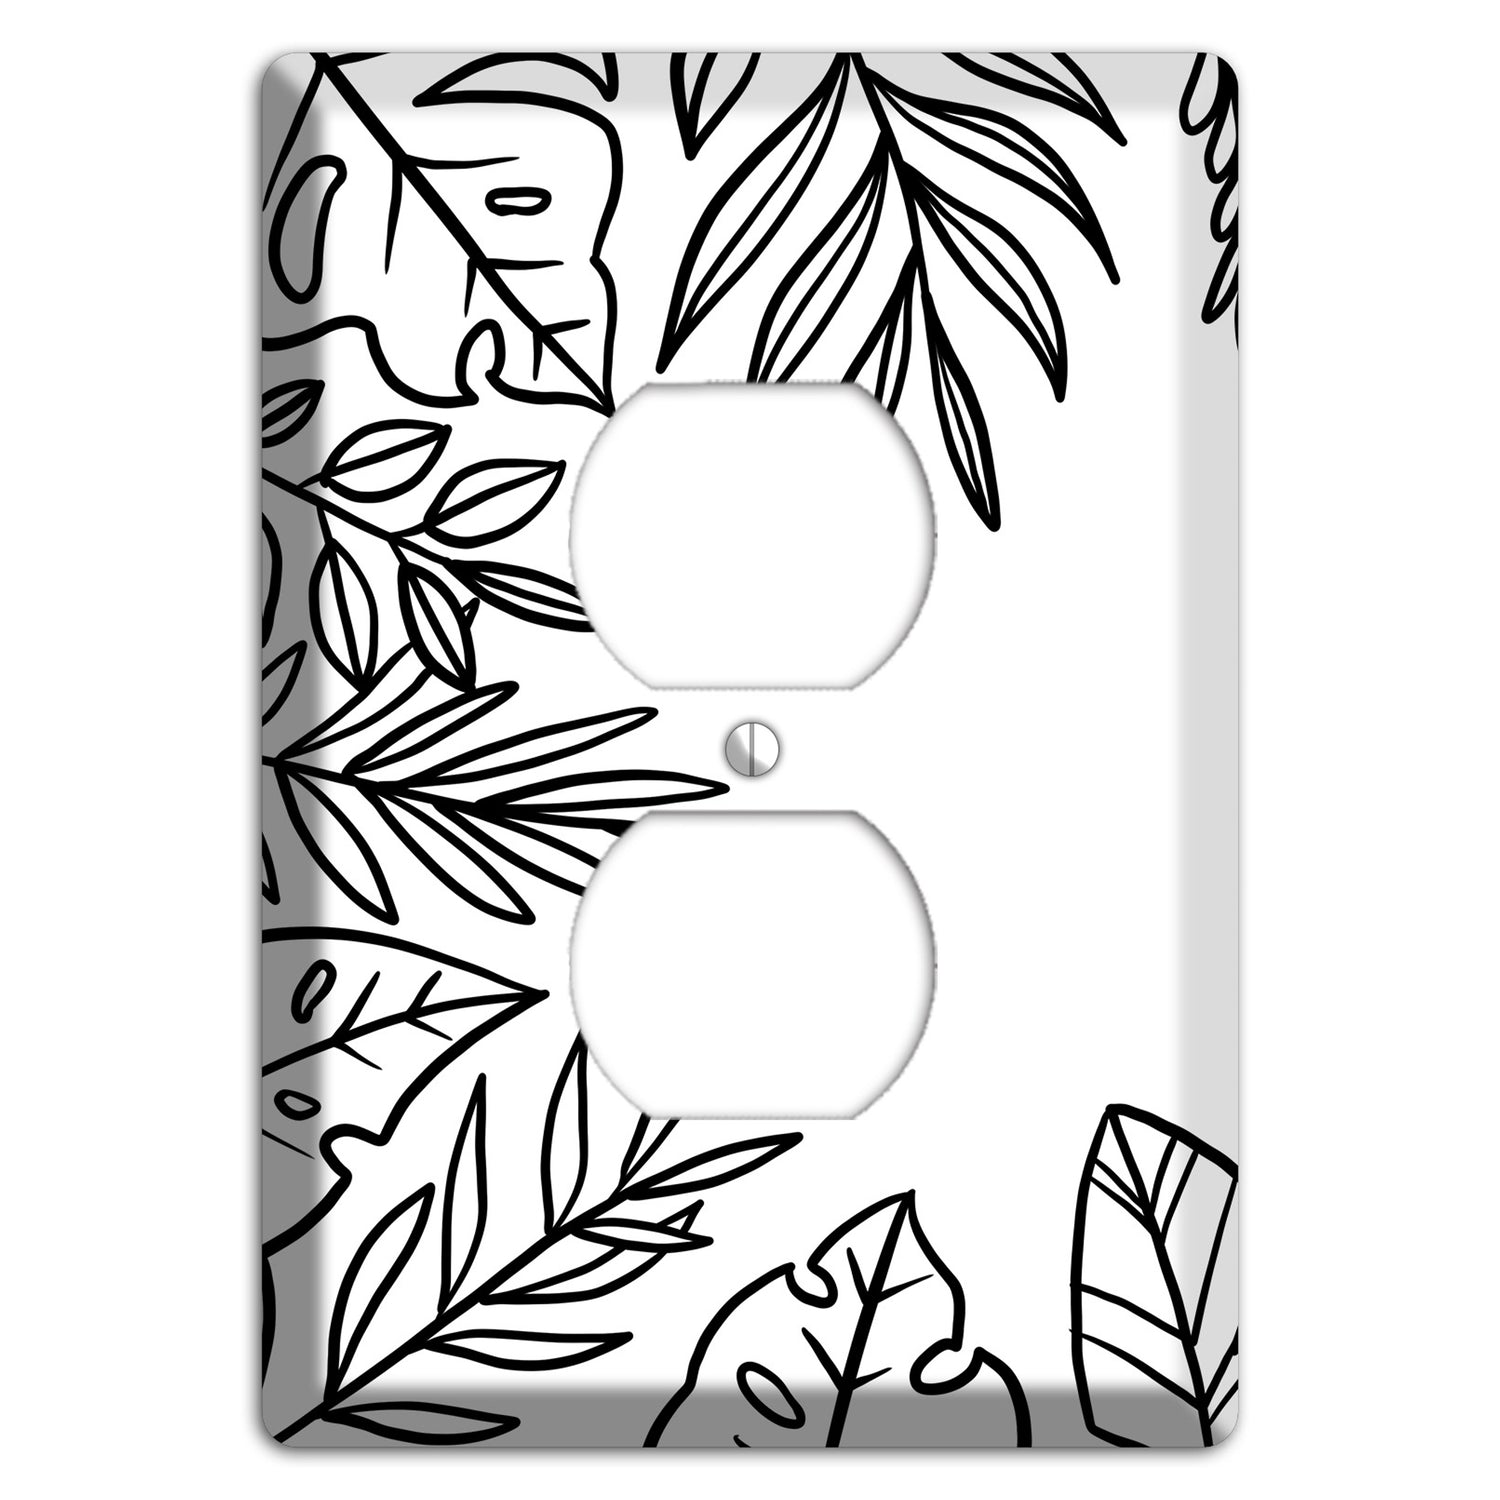 Hand-Drawn Leaves 4 Duplex Outlet Wallplate